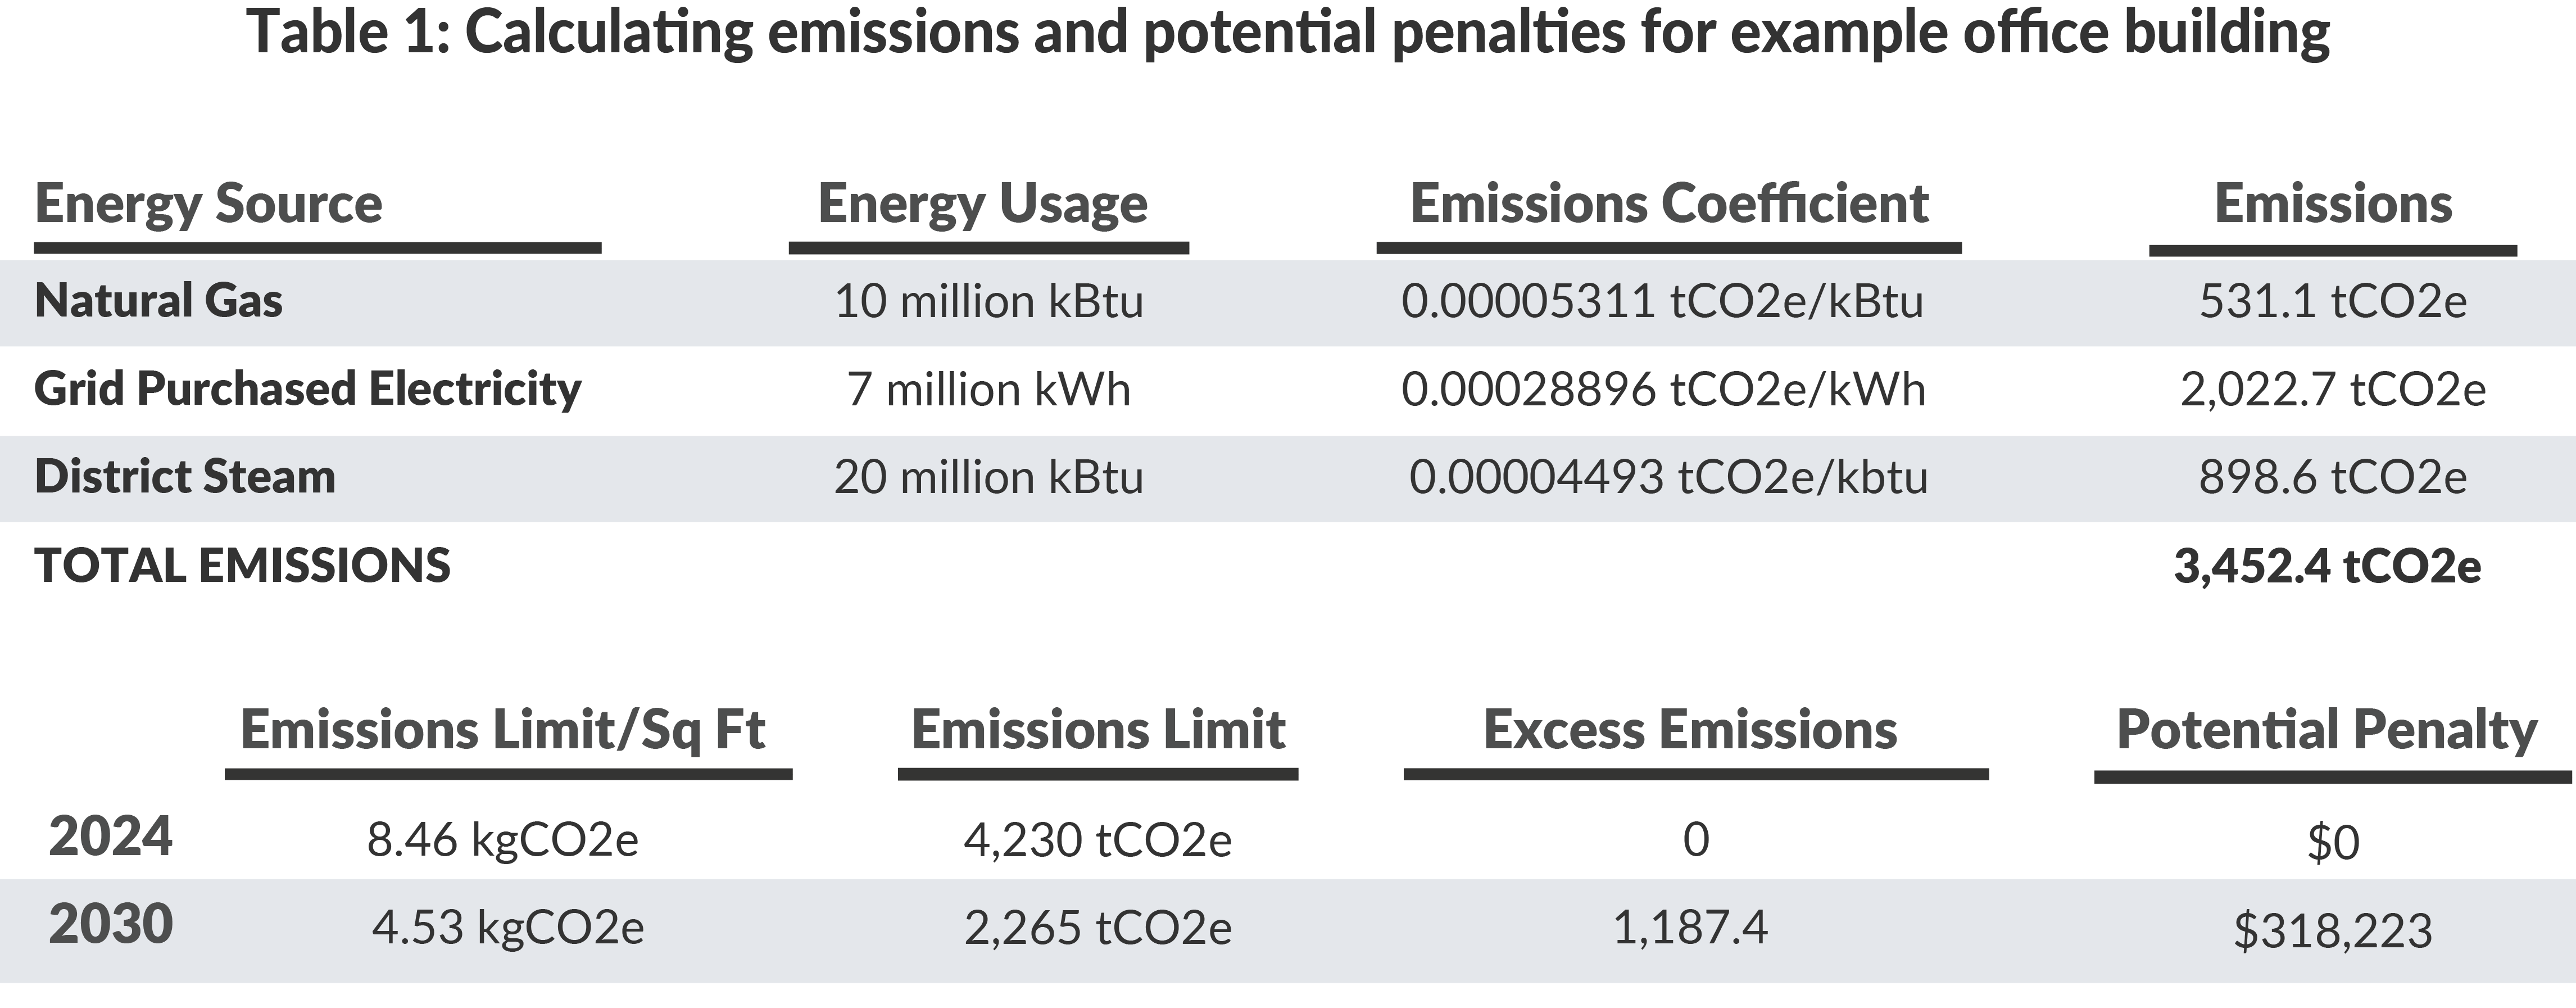 Calculating emissions and potential penalties for example office building